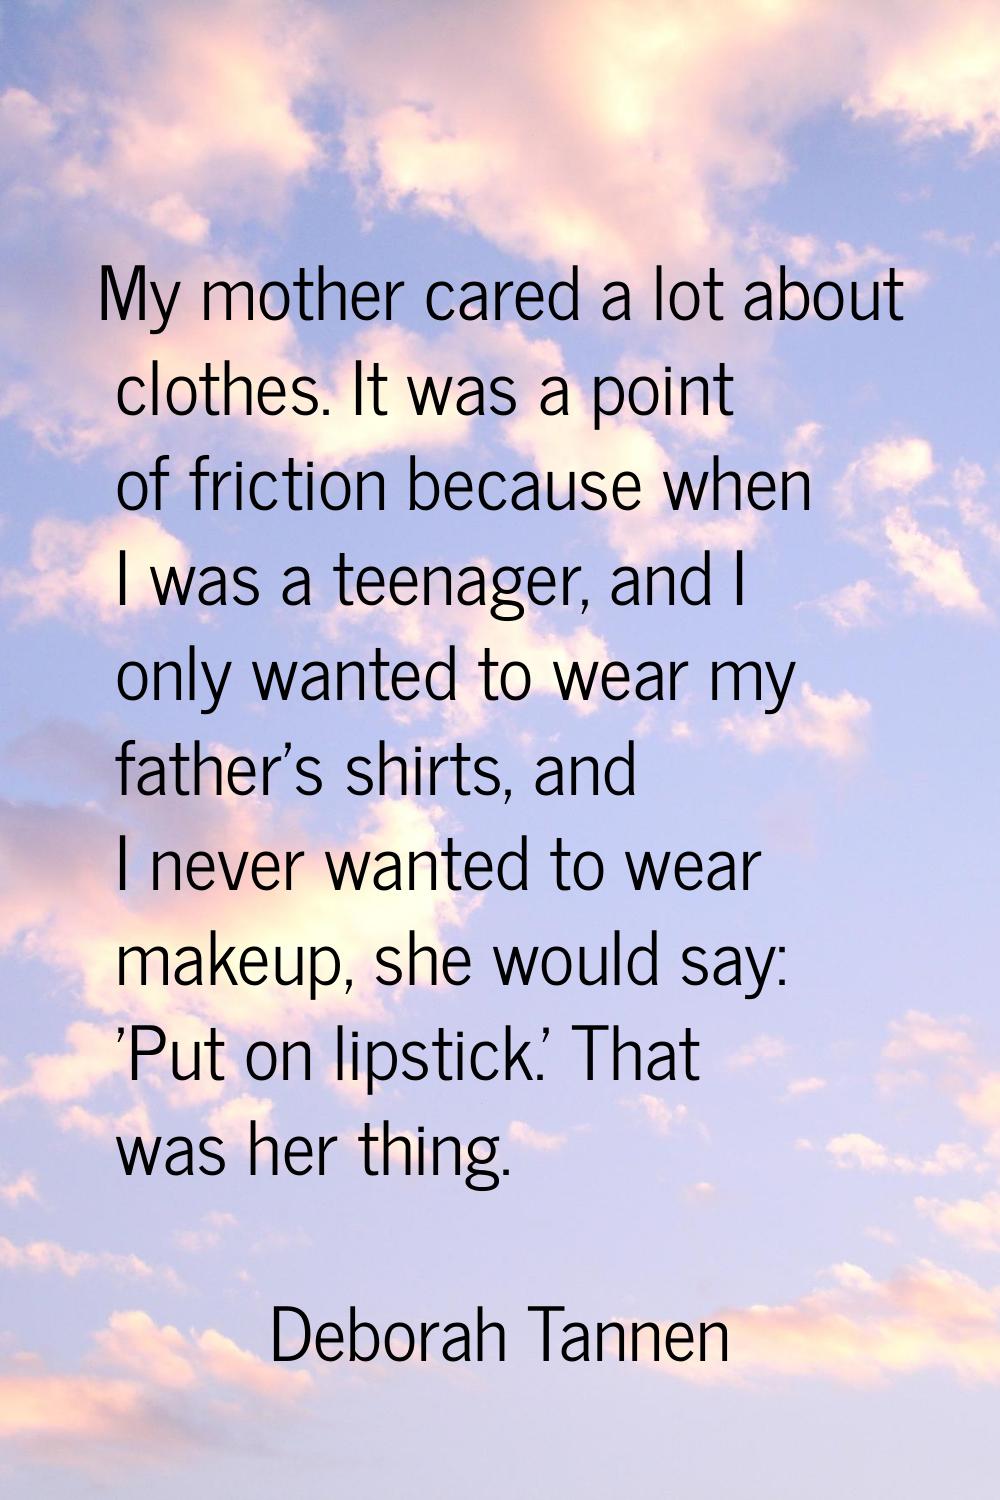 My mother cared a lot about clothes. It was a point of friction because when I was a teenager, and 